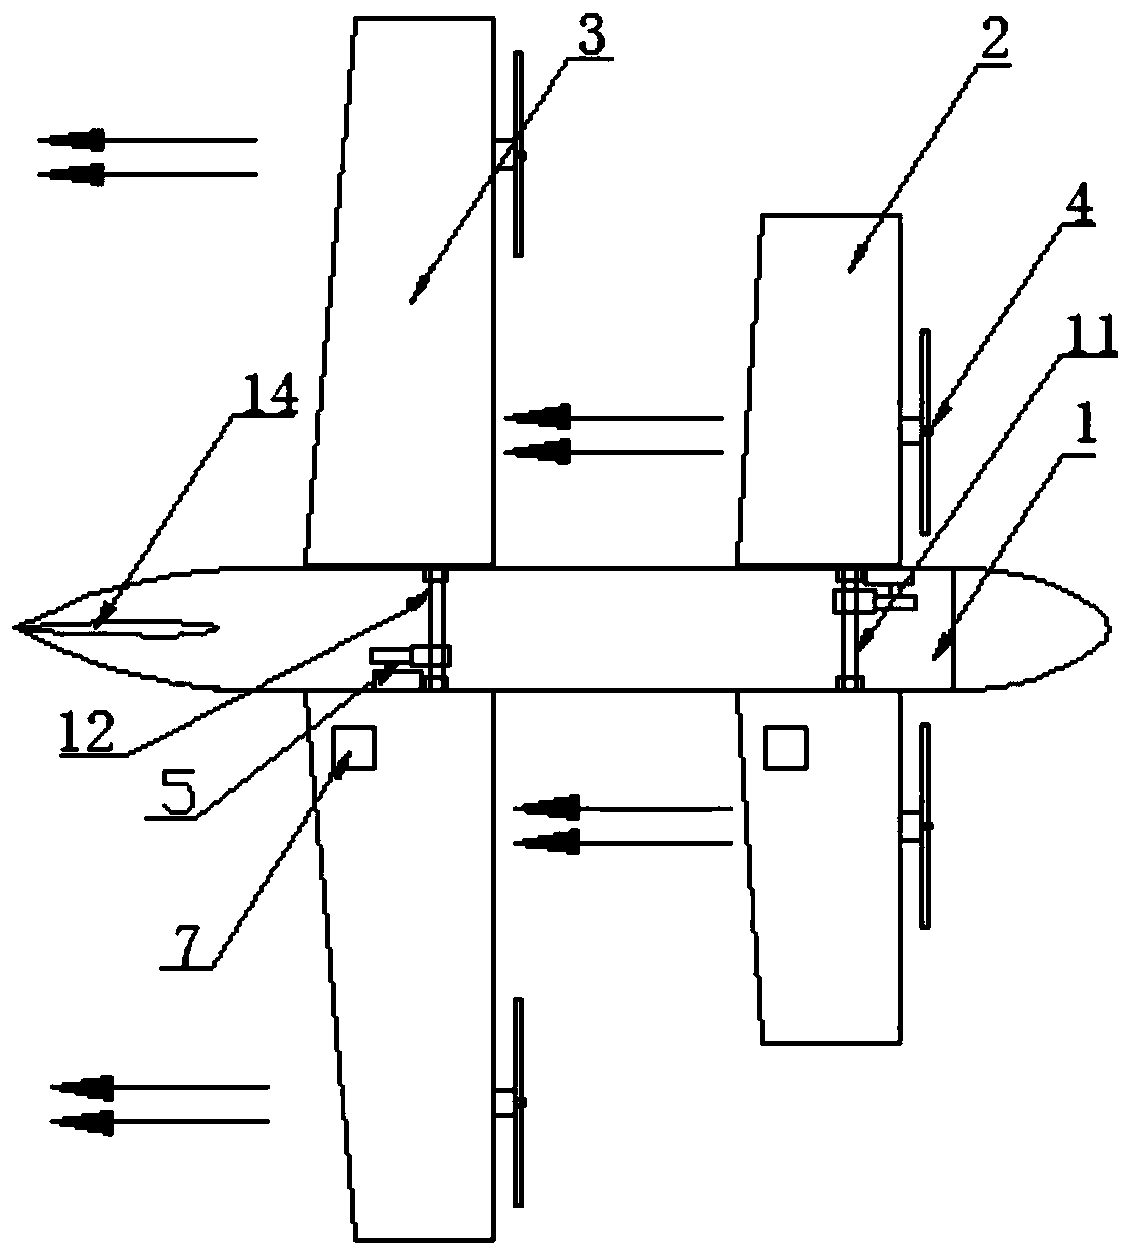 Tilting wing UAV with an aerodynamic layout and tilting mechanism